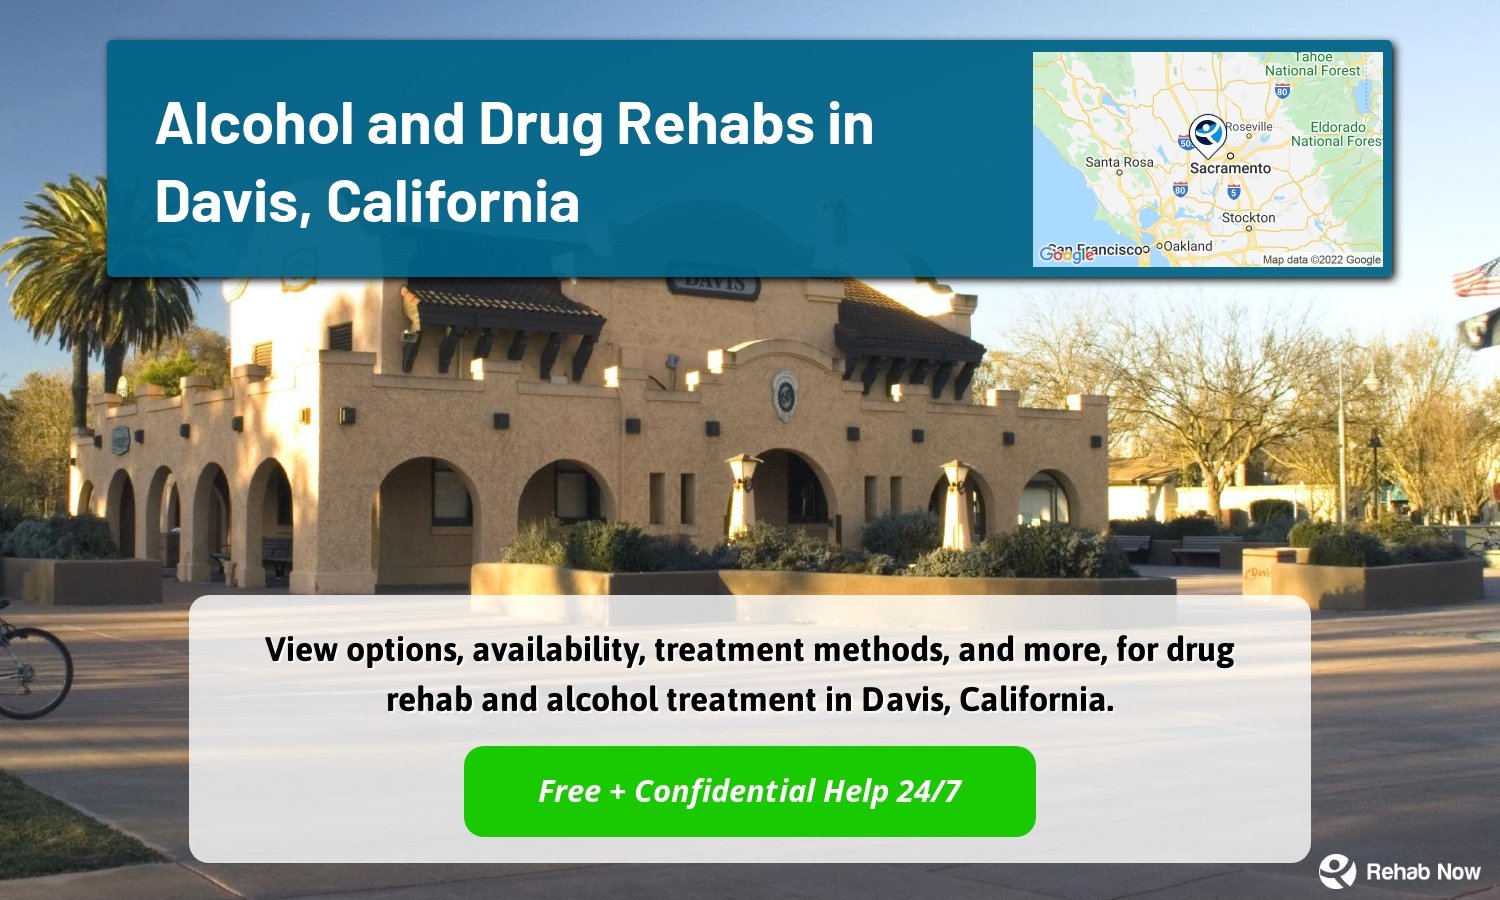 View options, availability, treatment methods, and more, for drug rehab and alcohol treatment in Davis, California.